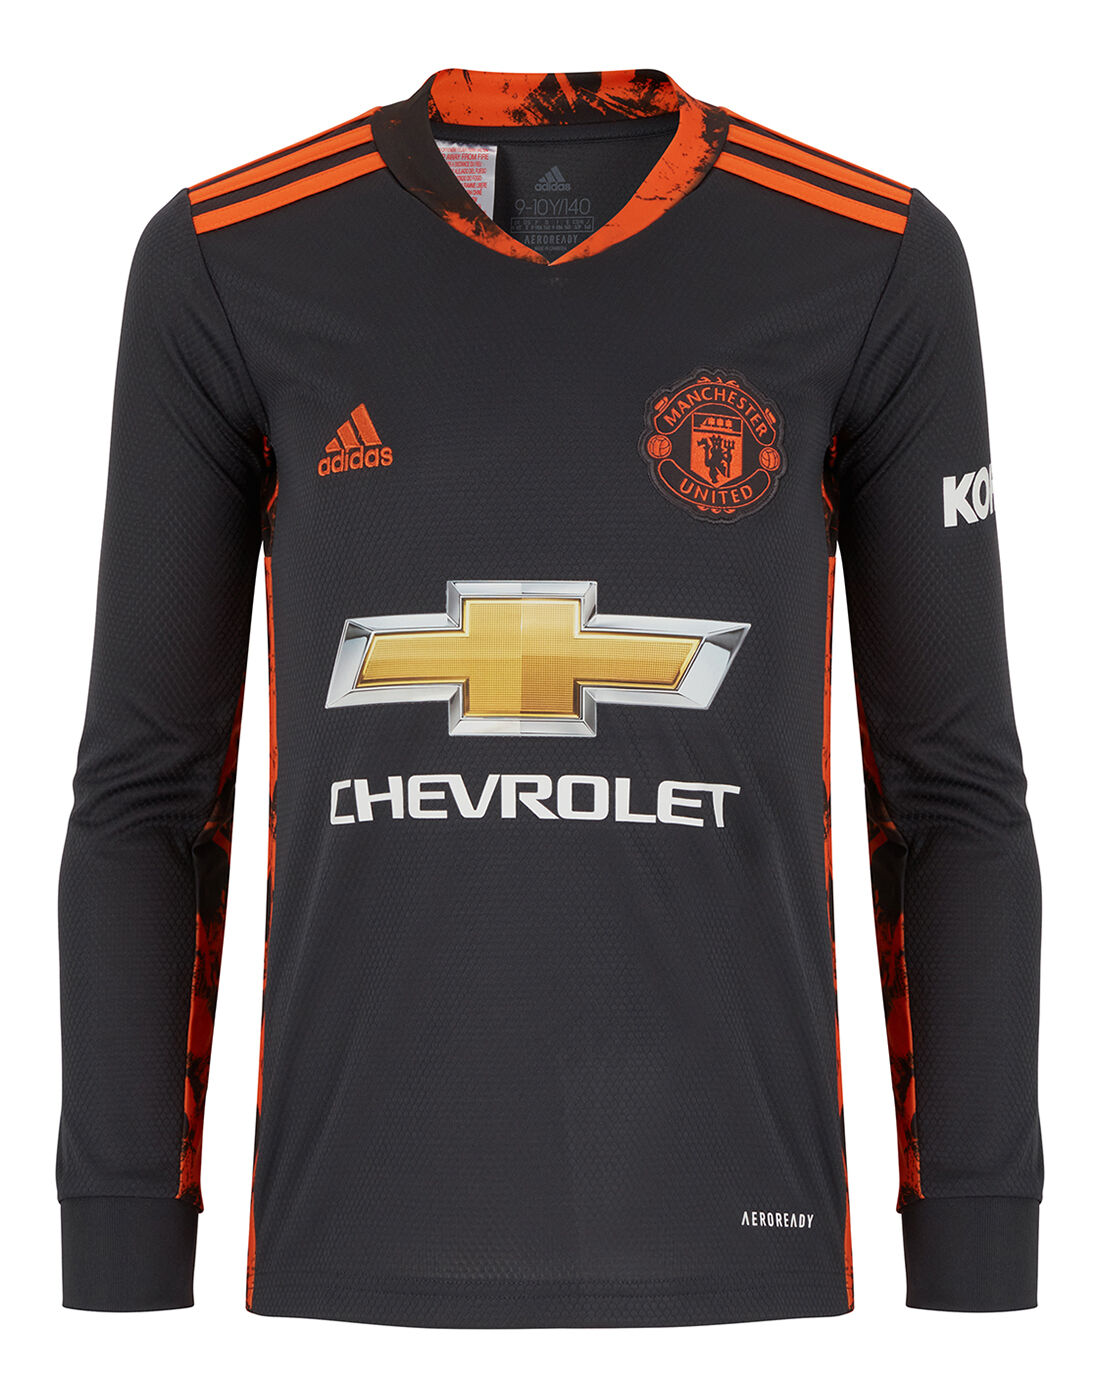 manchester united jersey lifestyle sports